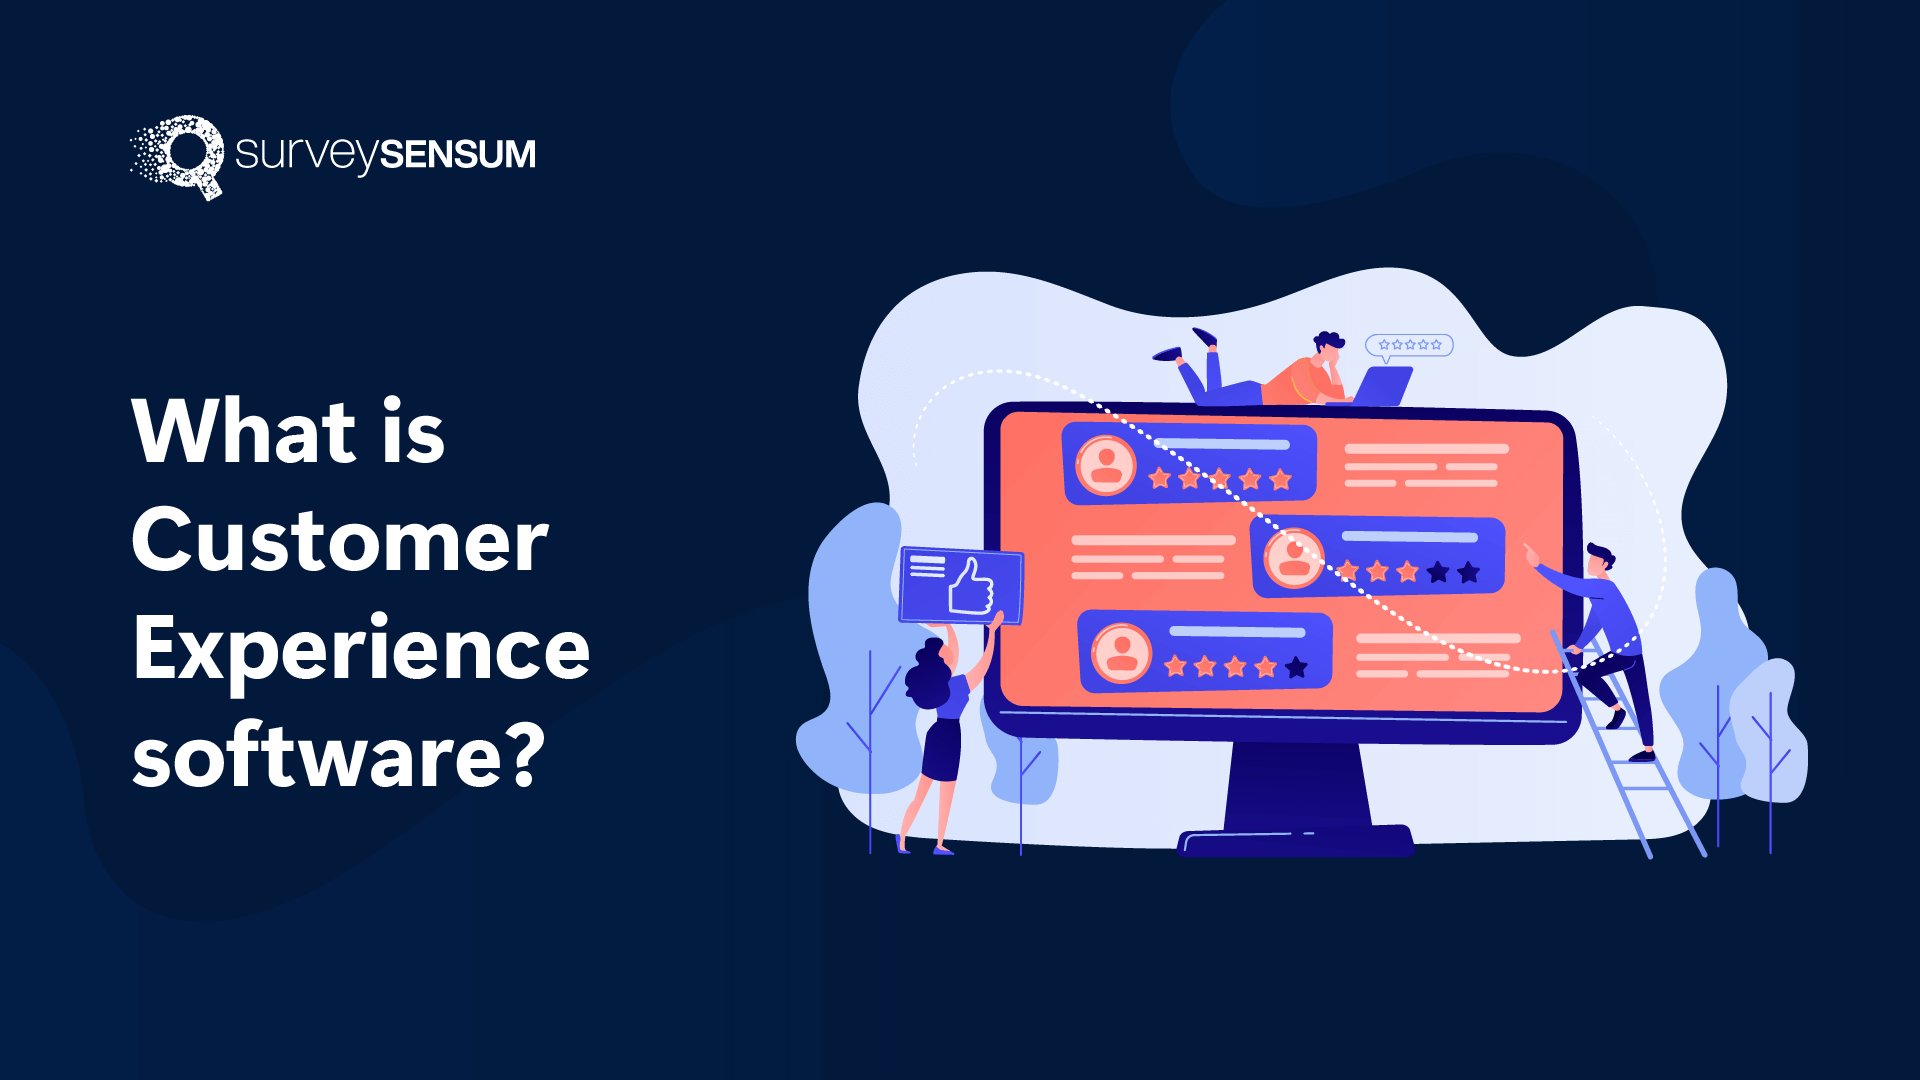 What is Customer Experience Software?